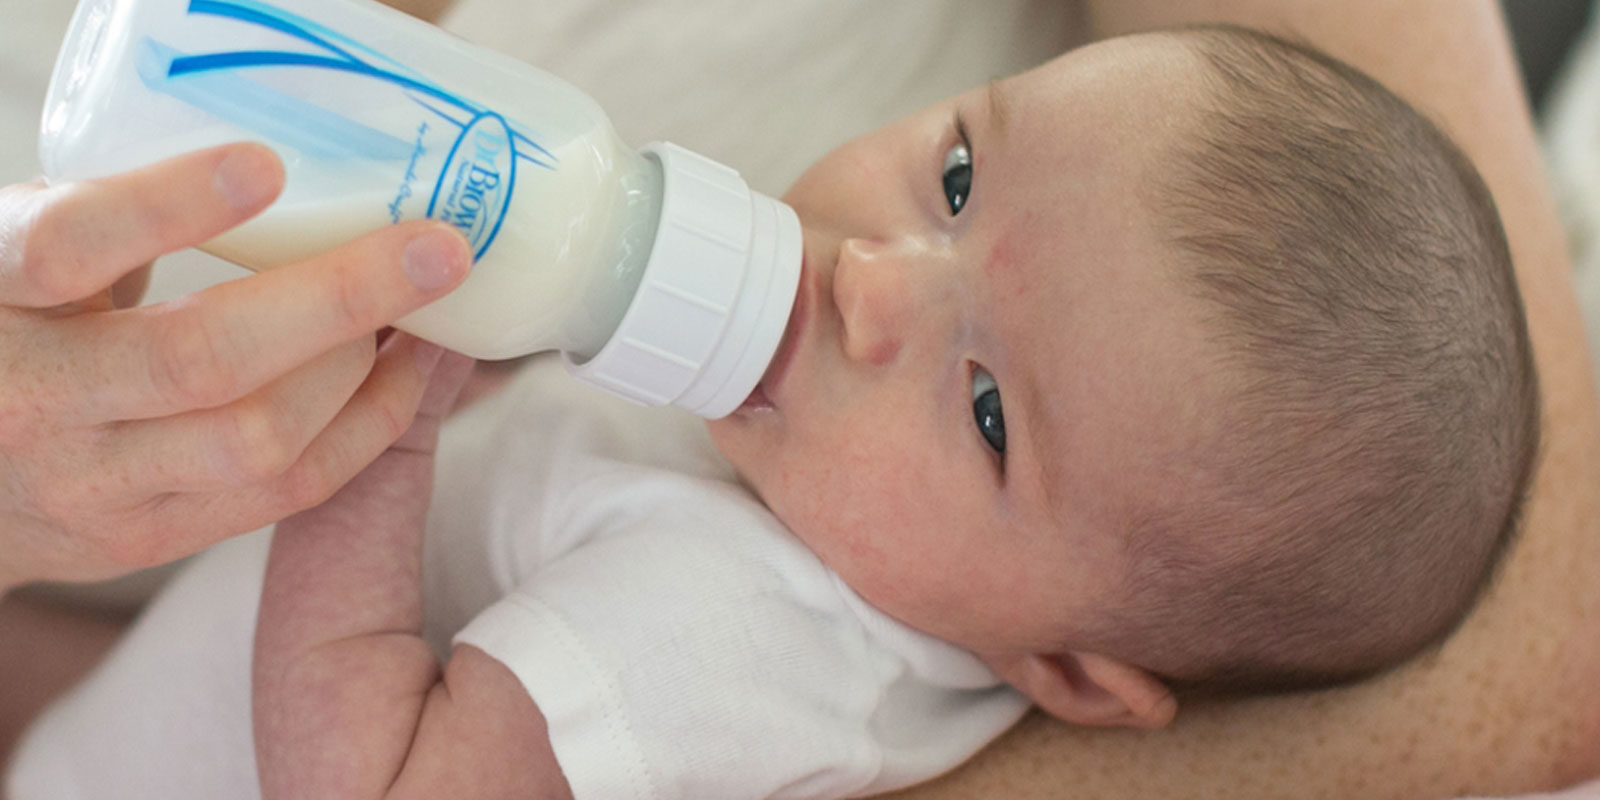 best bottles for preemies with reflux